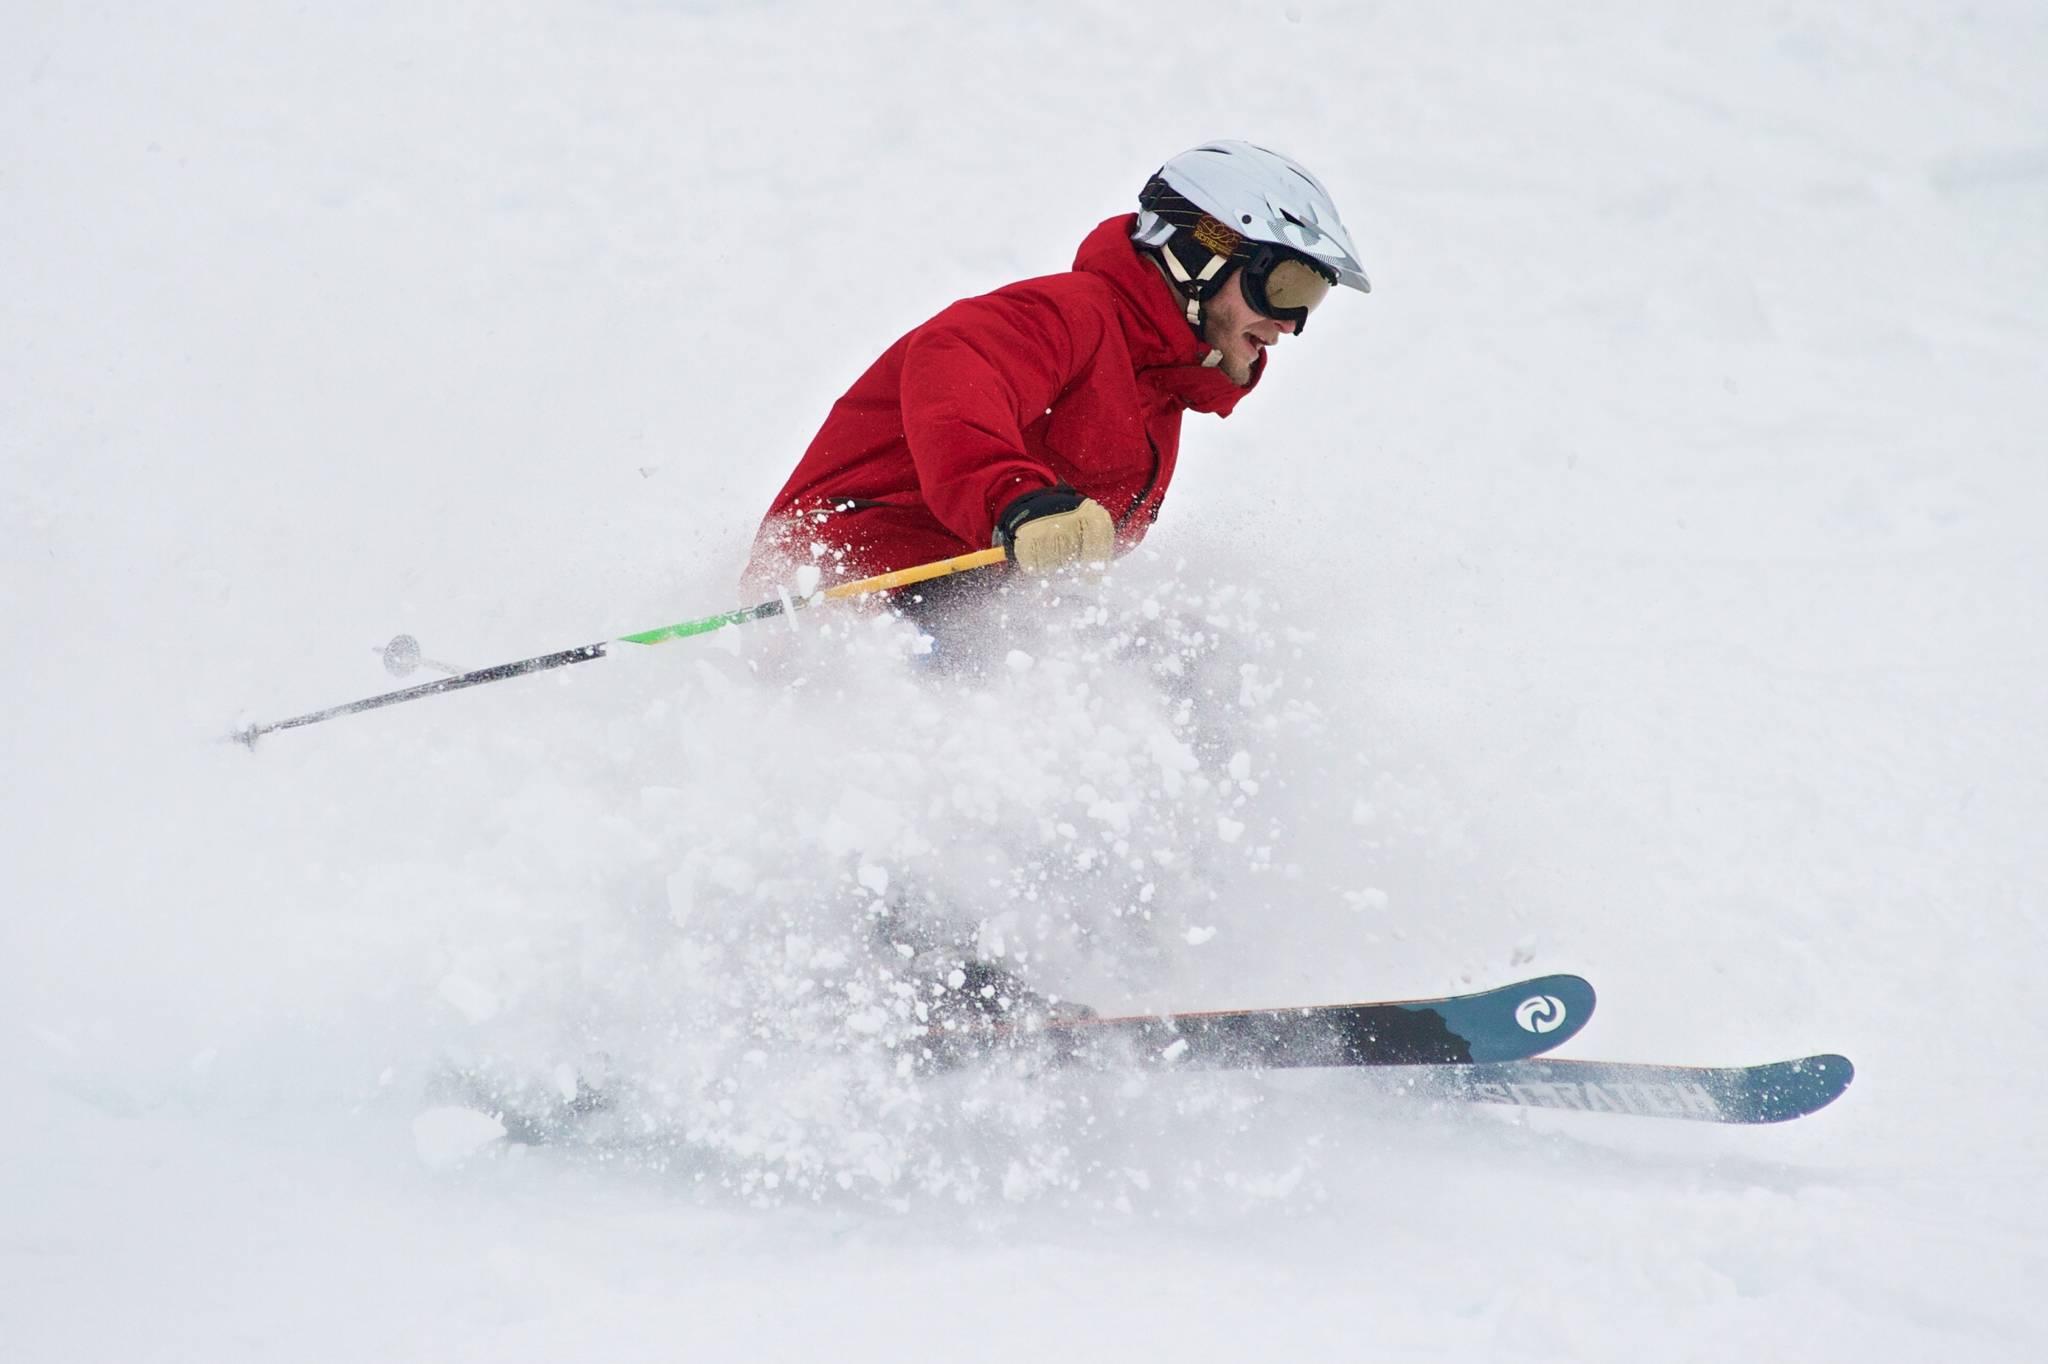 In this January 2015 photo, a man skis at Eaglecrest Ski Area. (Michael Penn | Juneau Empire File)